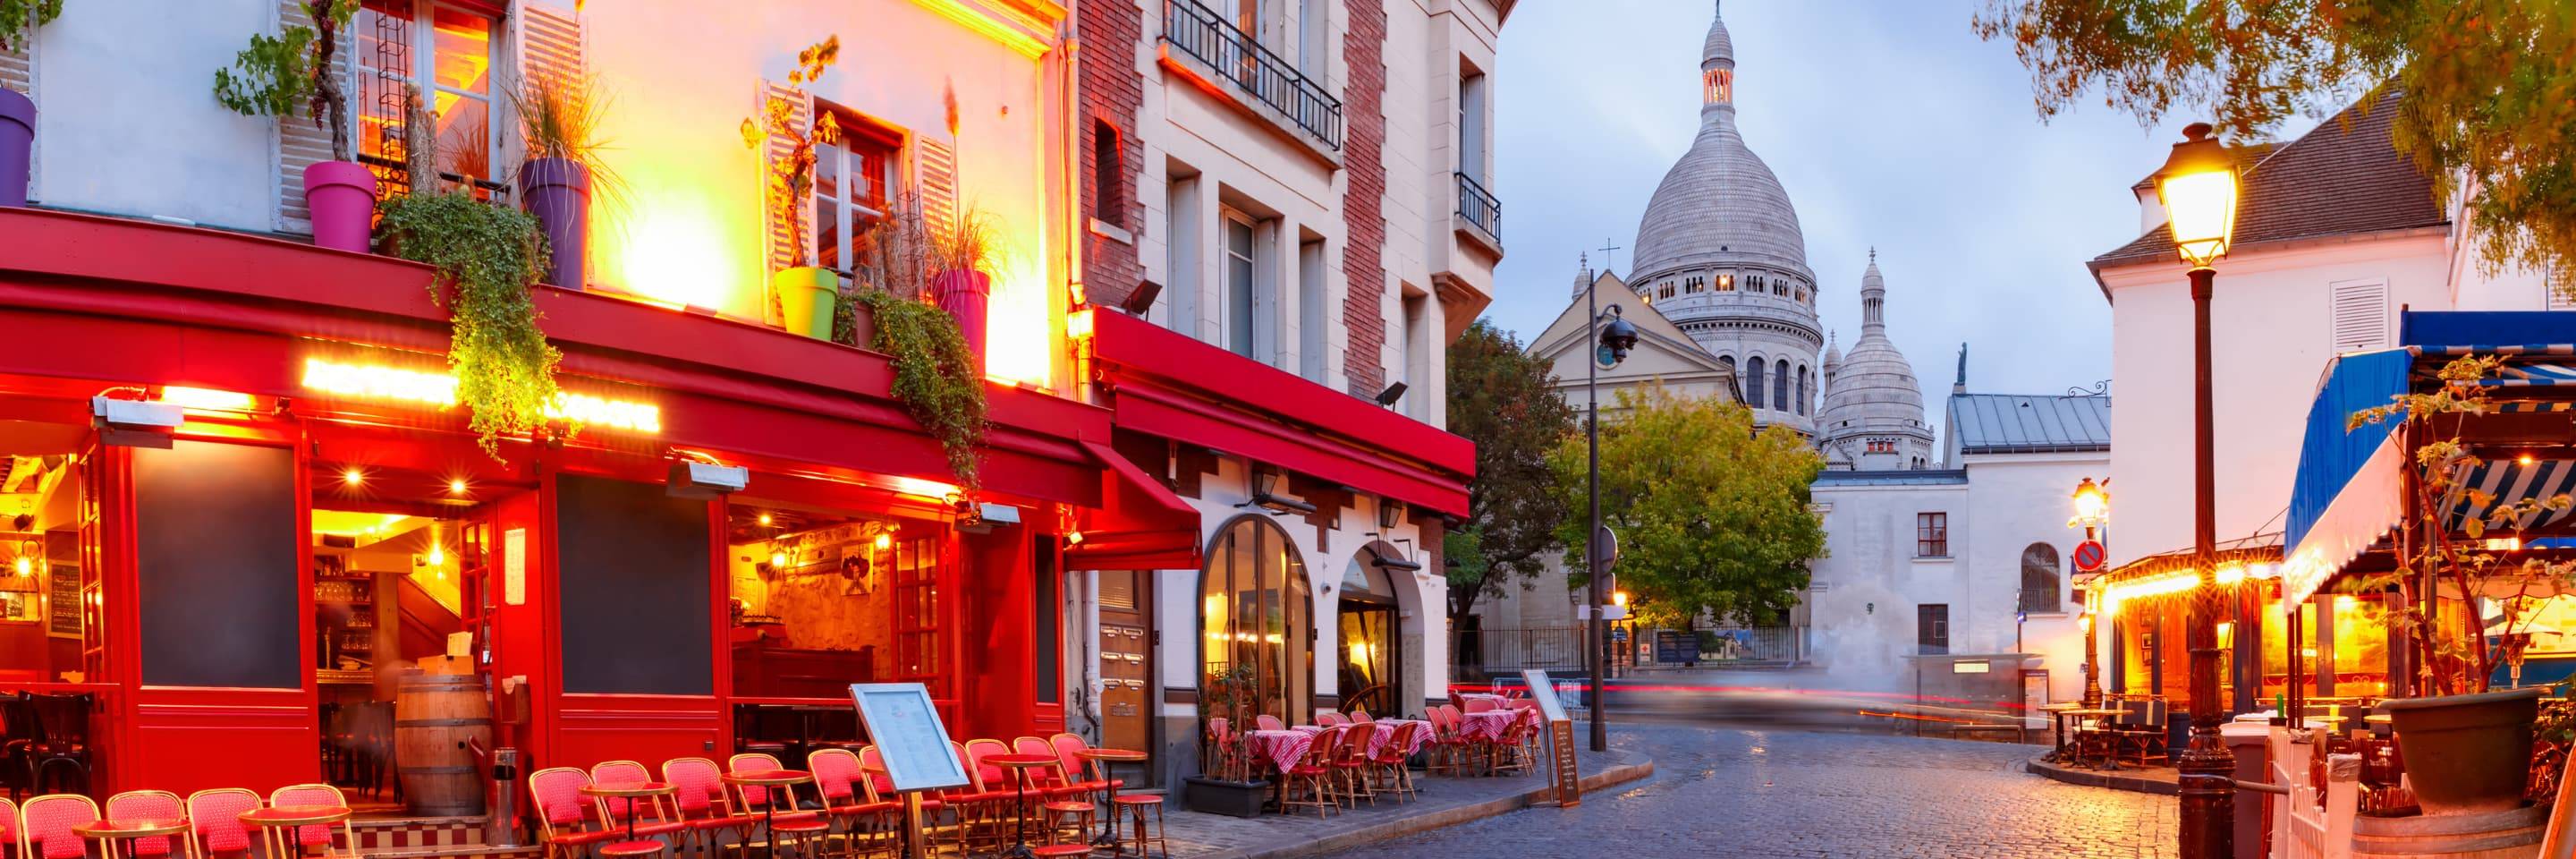 Montmartre Free Walking Tour: Moulin Rouge to Sacre Coeur